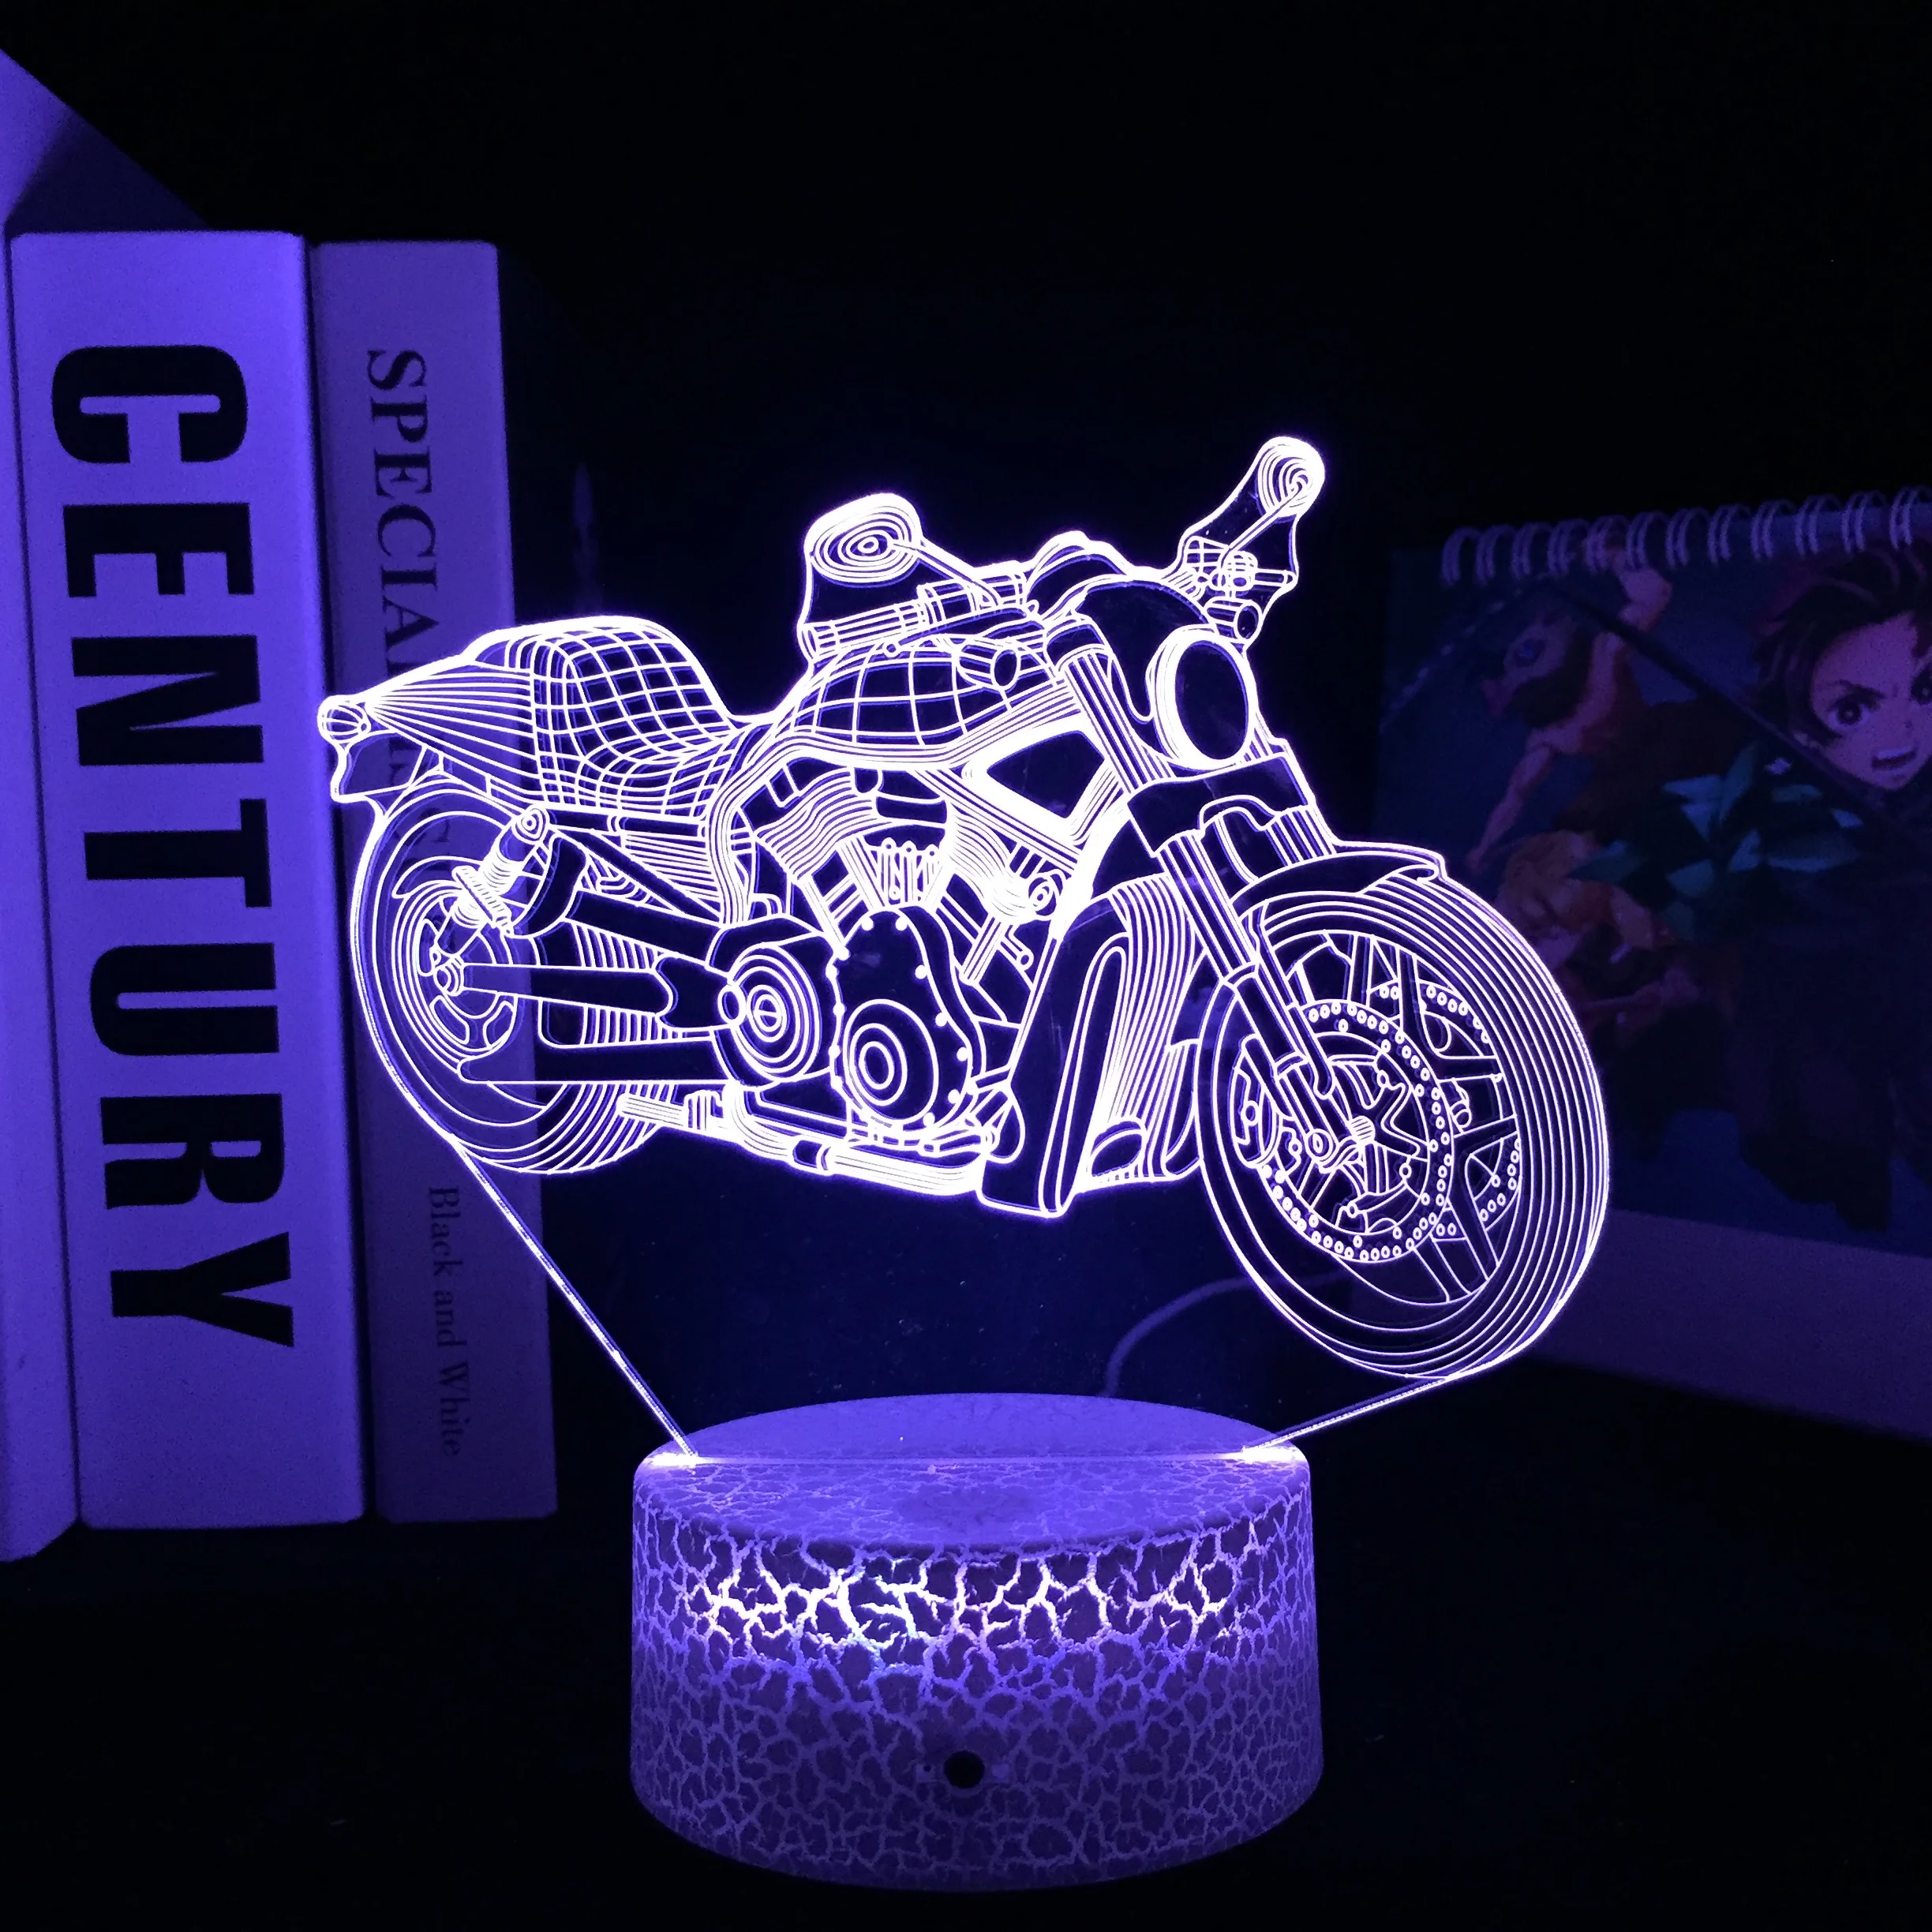 

3D Illusion Lamp Motocycle Nightlight for Child Bedroom Decor Colors Changing Atmosphere LED Night Light Birthday Gift Dropship